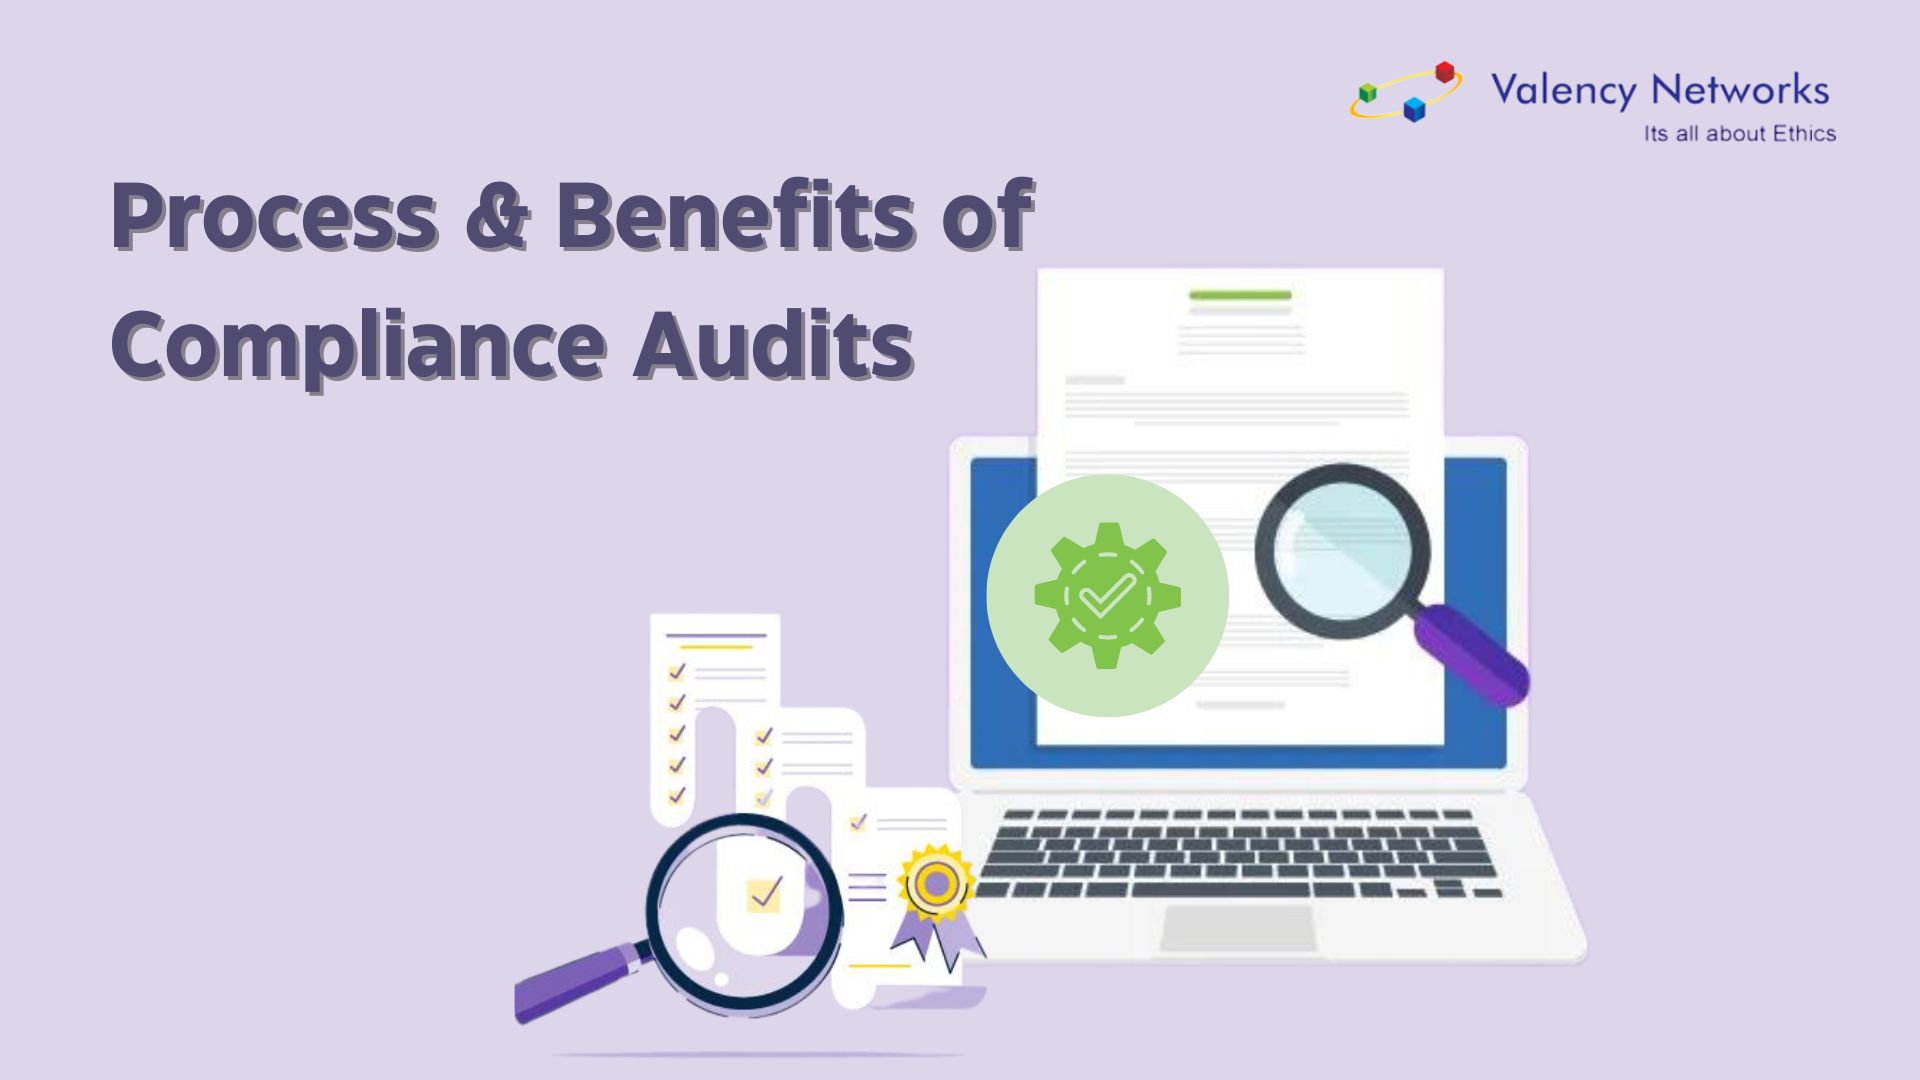 Process & Benefits of Compliance Audits